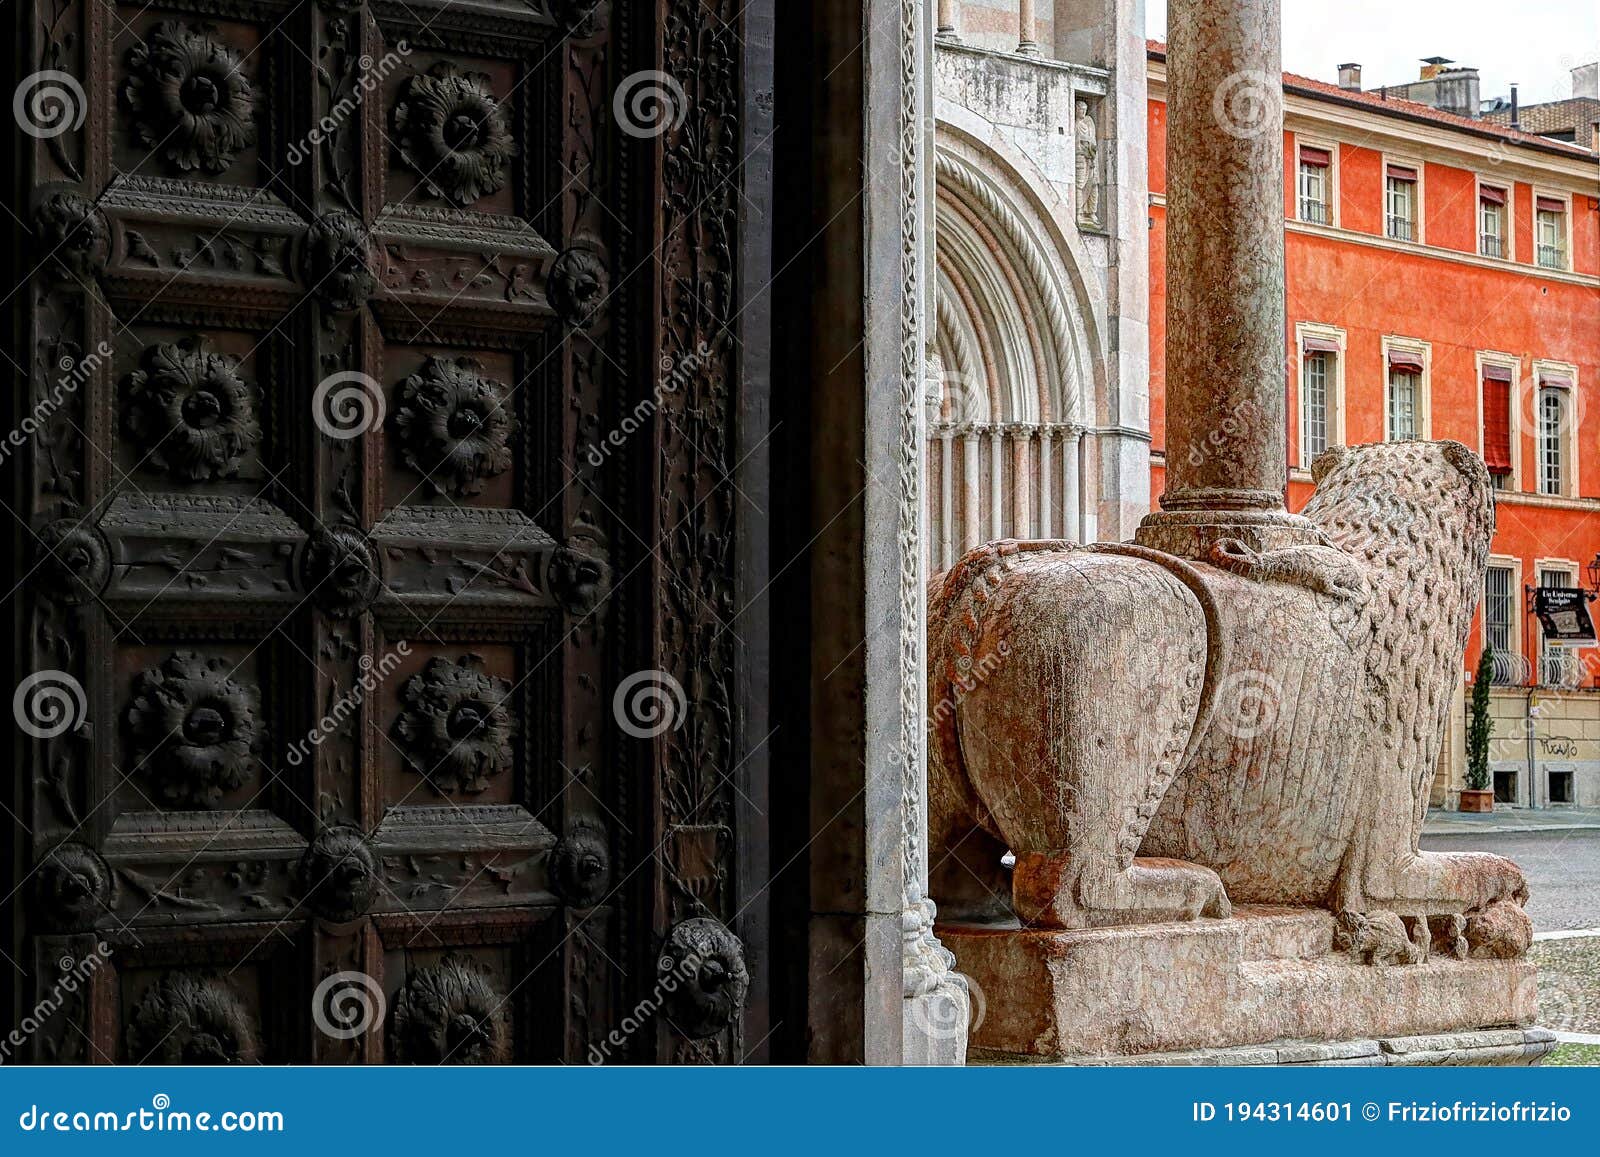 parma, detail of the entrance with ancien lion sculpture, romanic cathedral in the duomo square